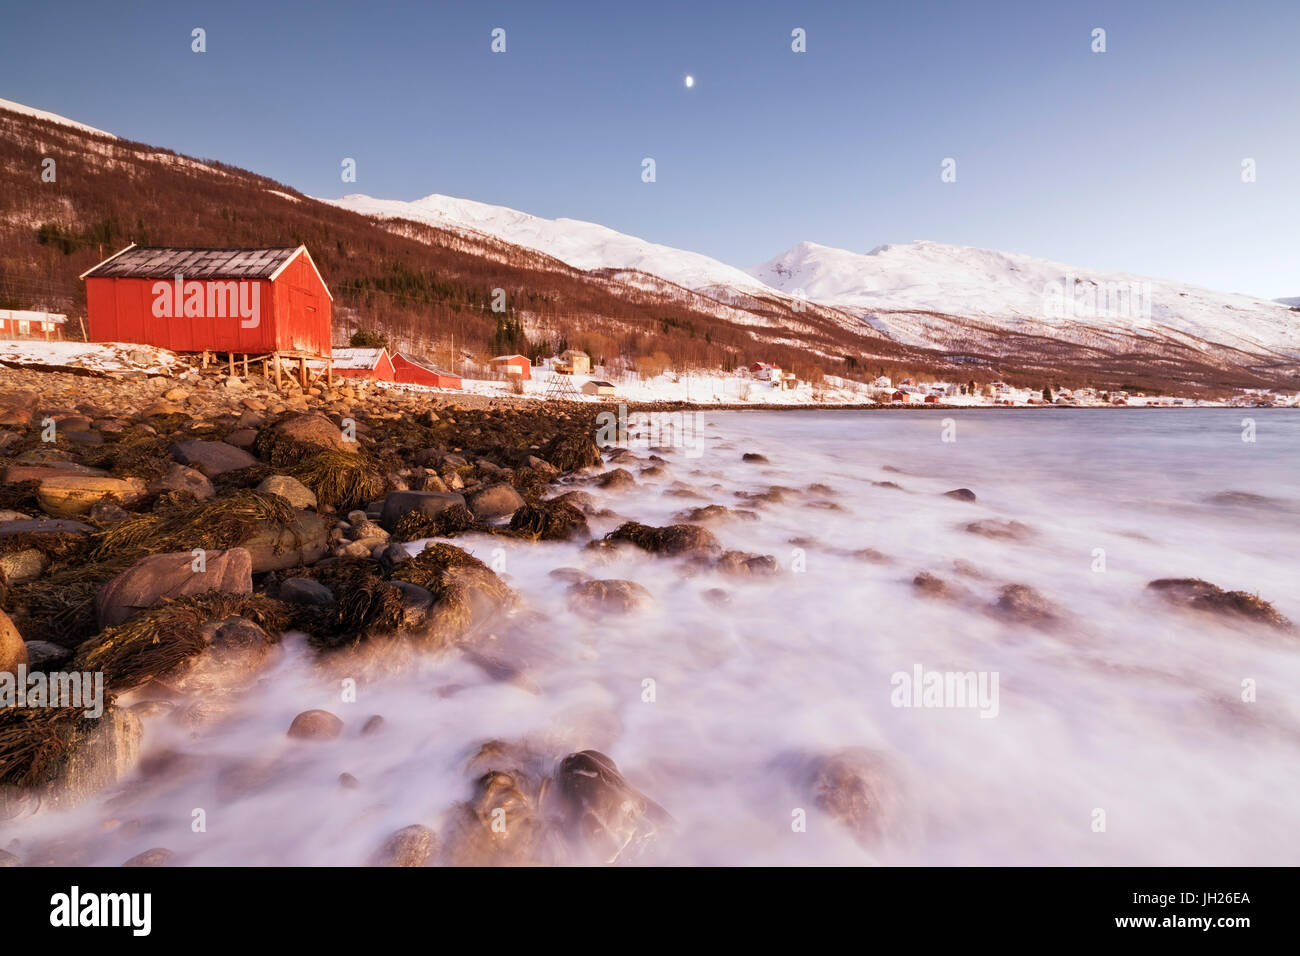 Waves of cold sea crashing on the rocks and typical wooden huts called Rorbu, Djupvik, Lyngen Alps, Troms, Norway, Scandinavia Stock Photo